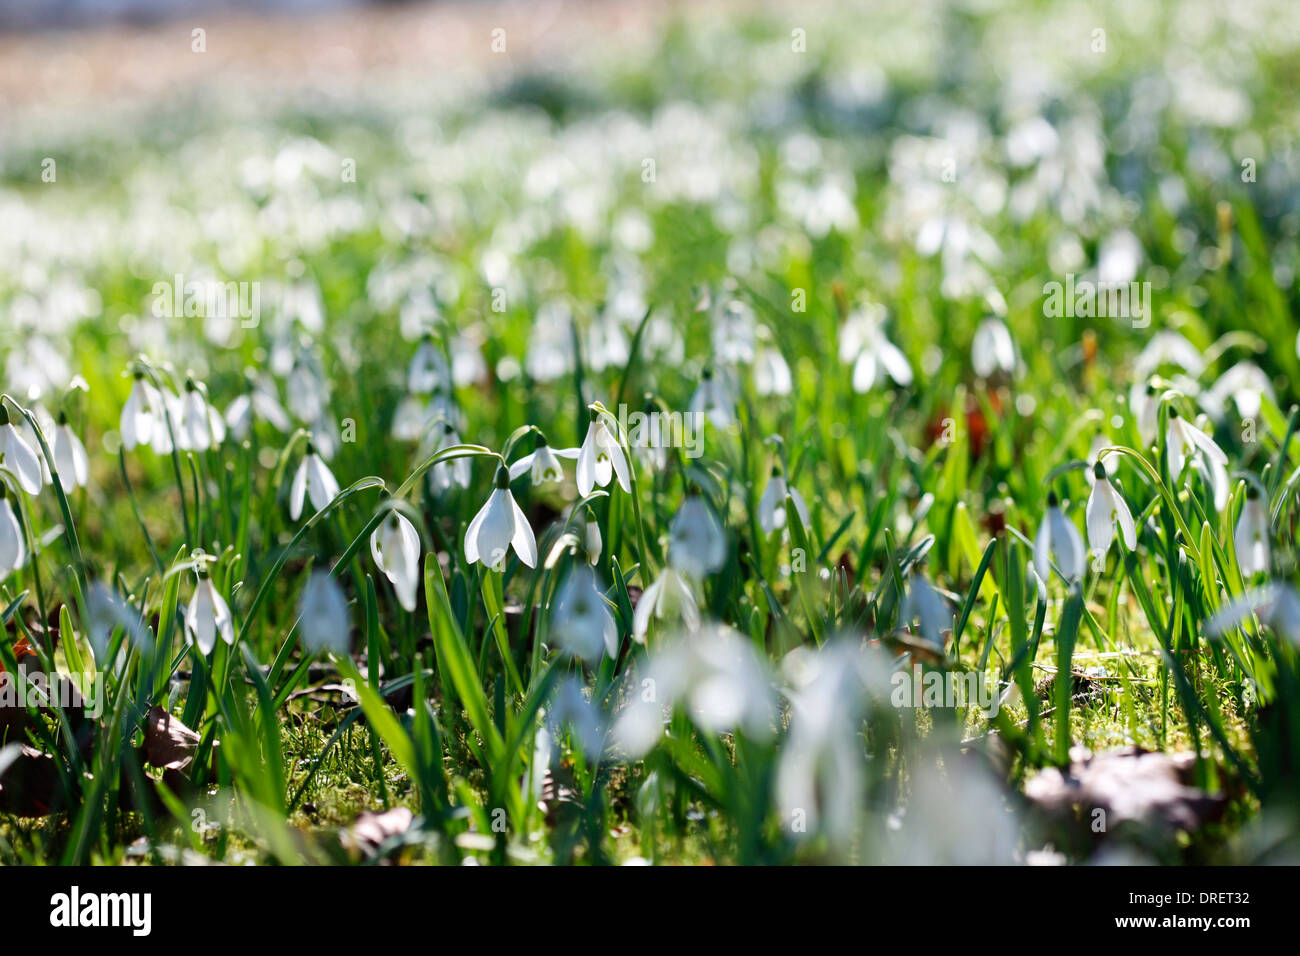 Perfectly Peaceful Scene Field of Snowdrops on a Sunny Day  Jane Ann Butler Photography  JABP691 Stock Photo